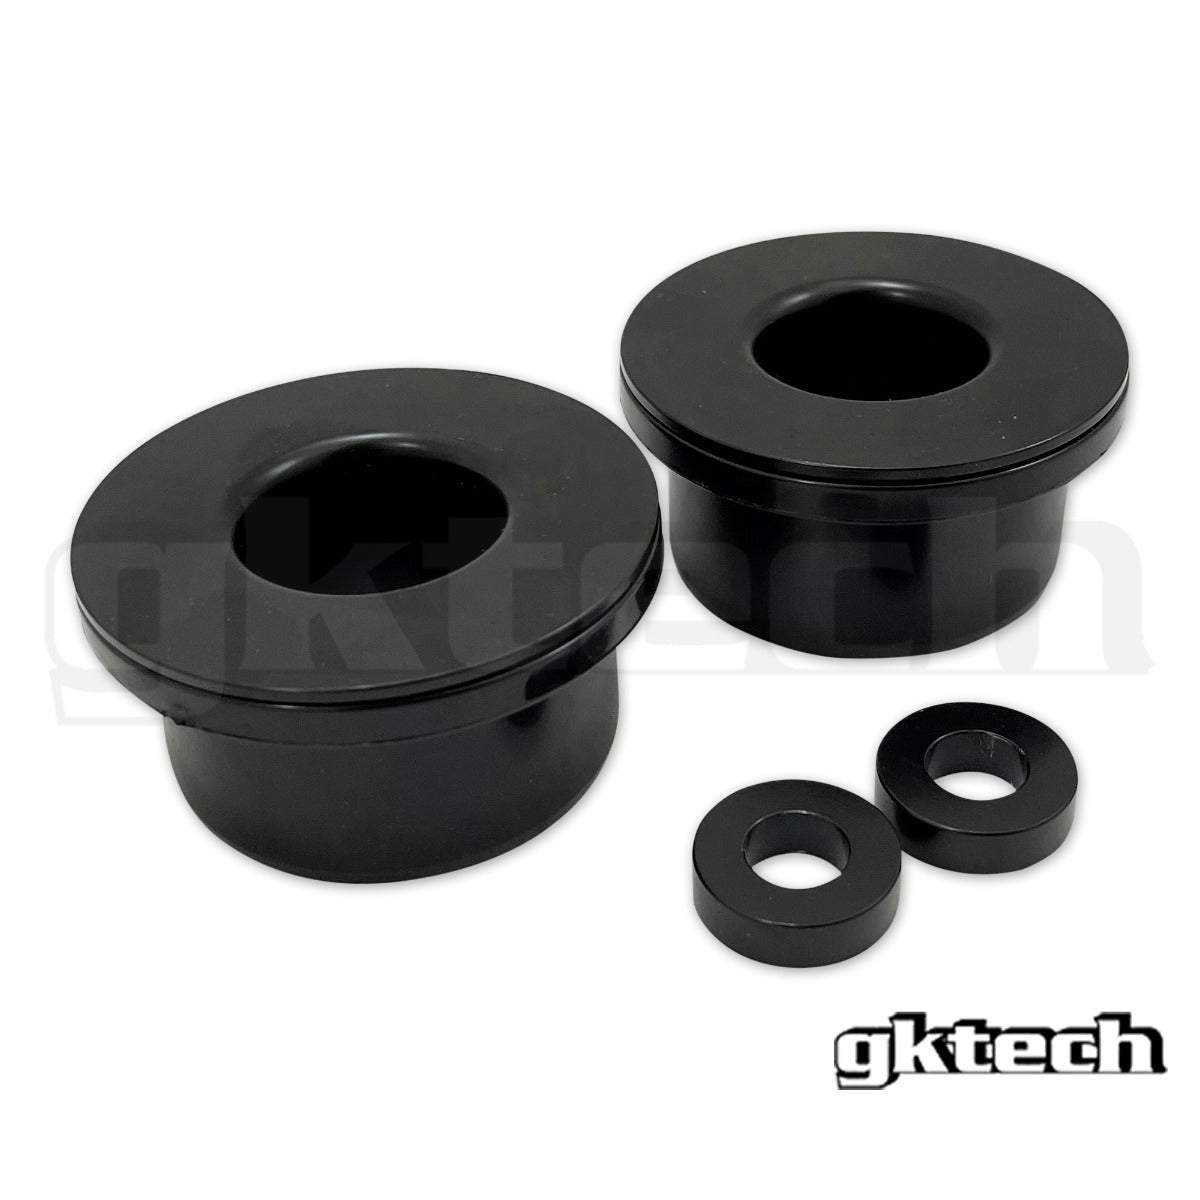 240sx/Skyline/300zx chassis Polyurethane Differential Bushings